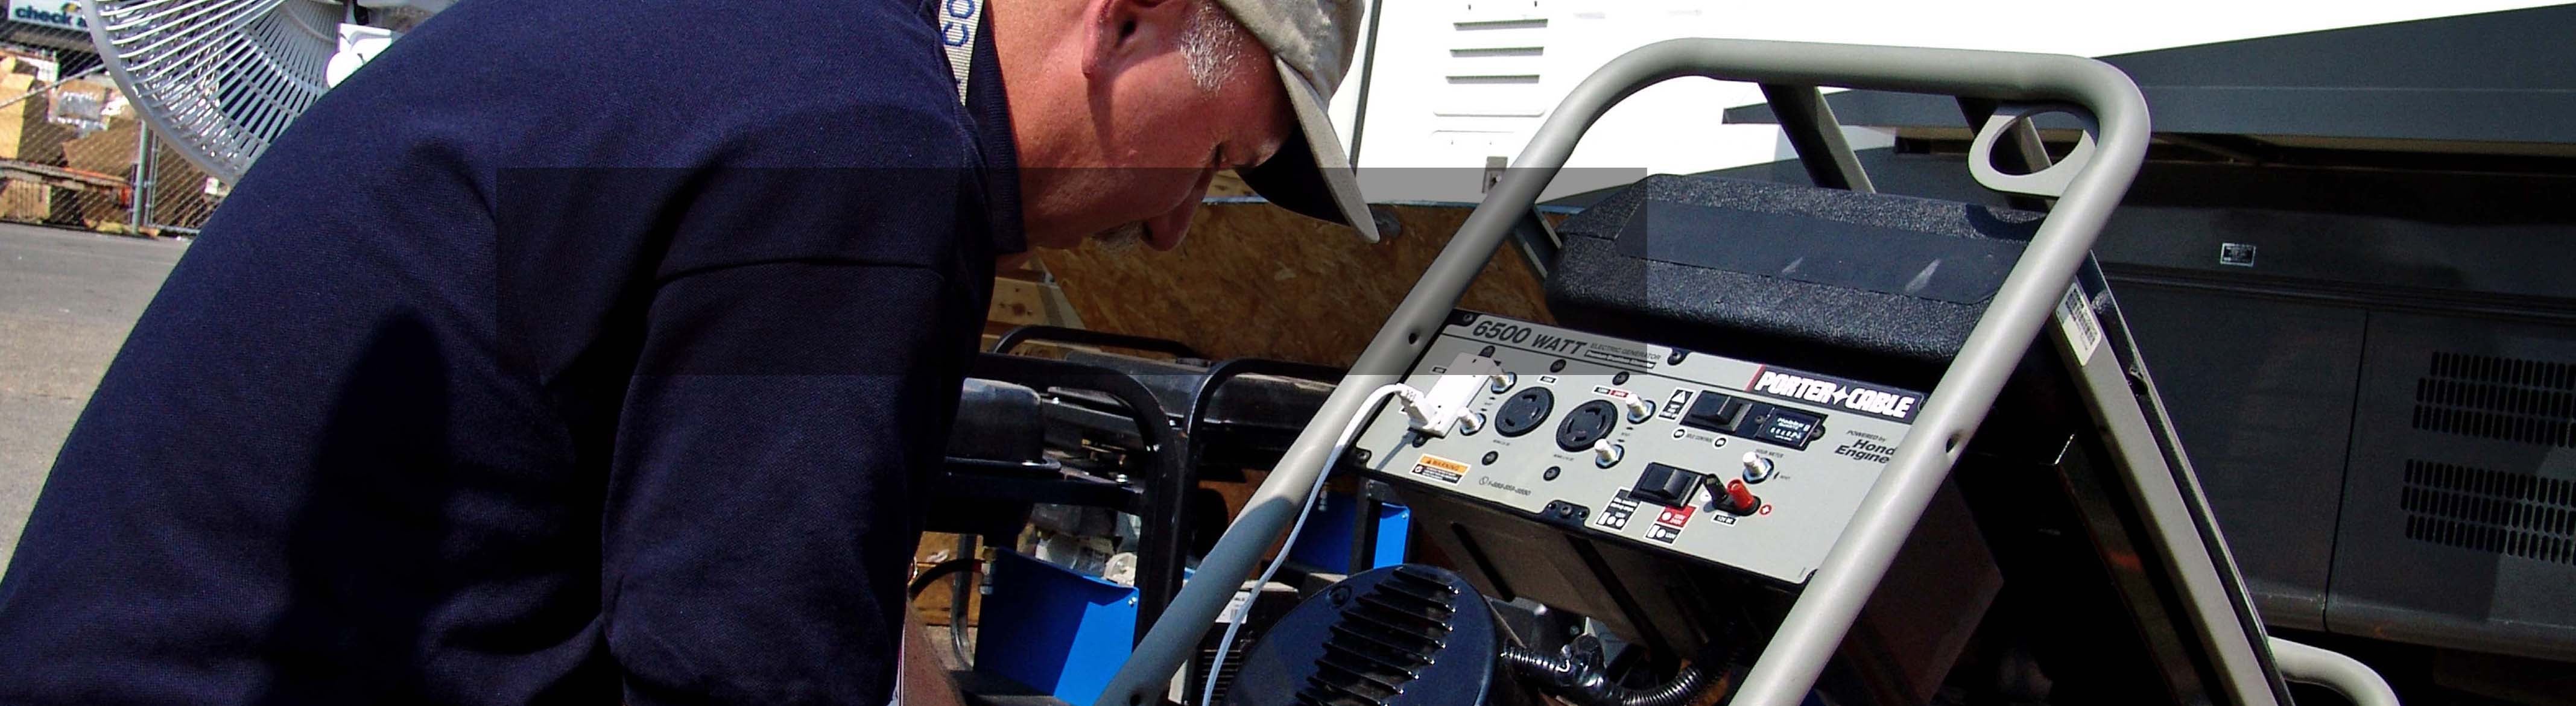 Never connect a standby generator into your home's electrical system